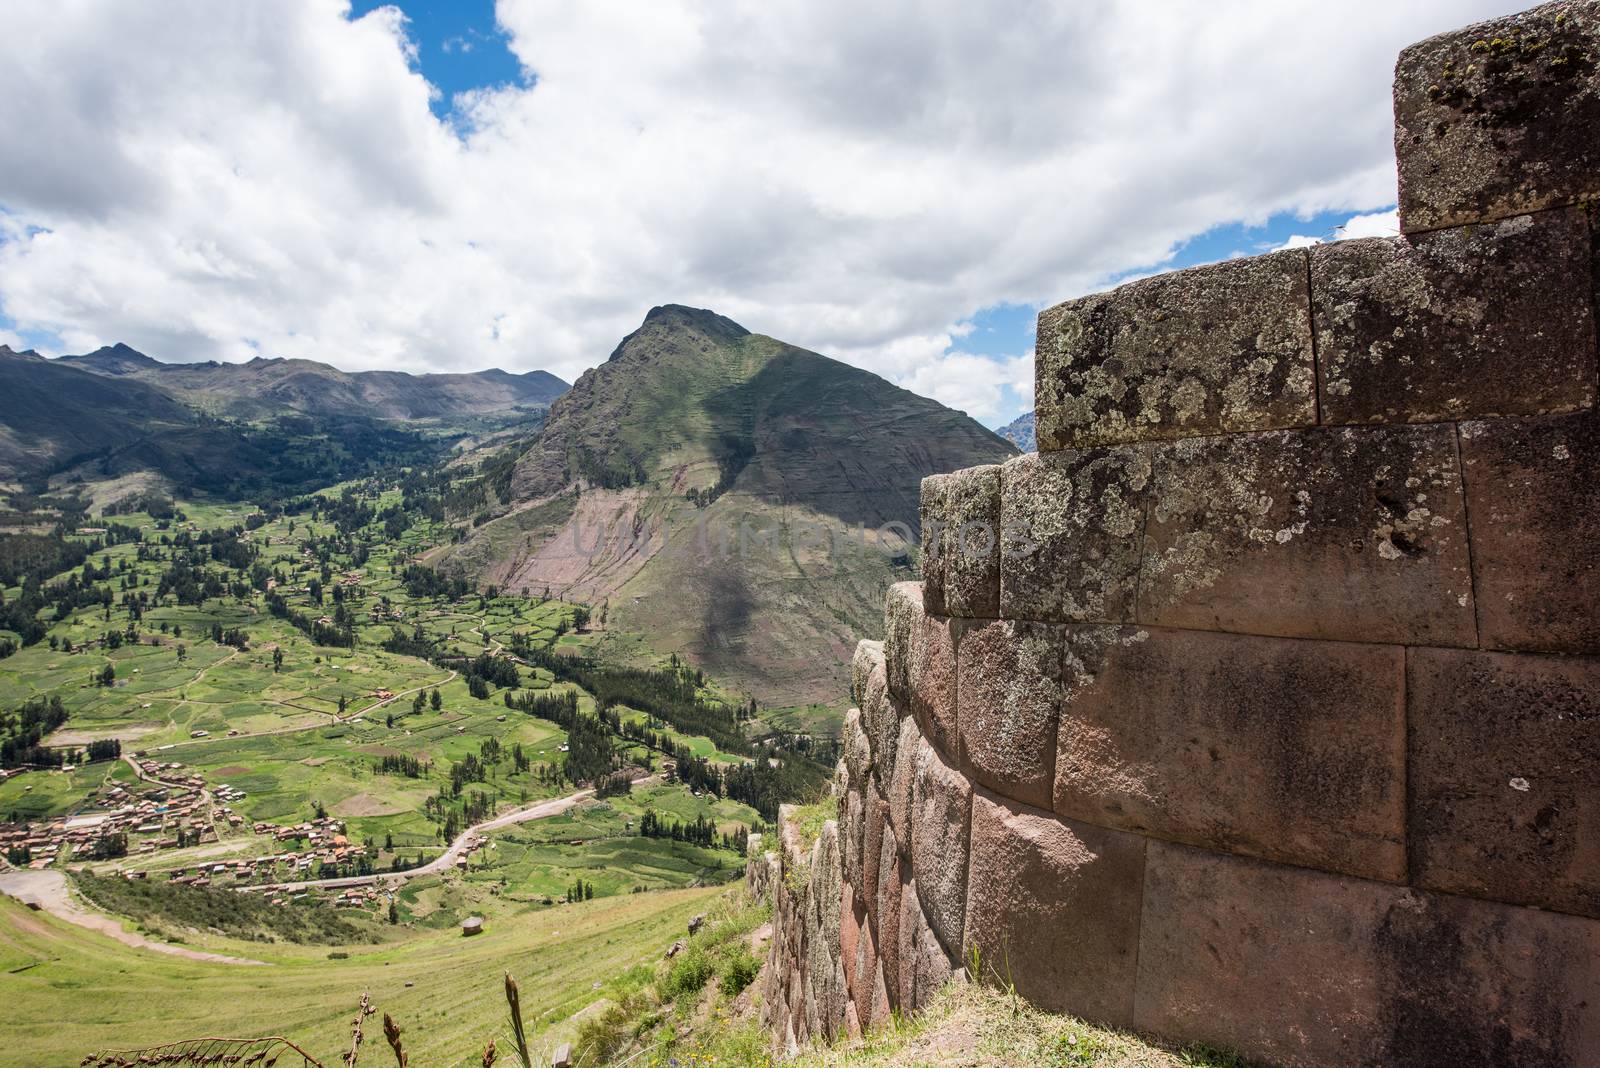 The Sacred Valley and the Inca ruins of Pisac, near Cuzco Peru. by rayints